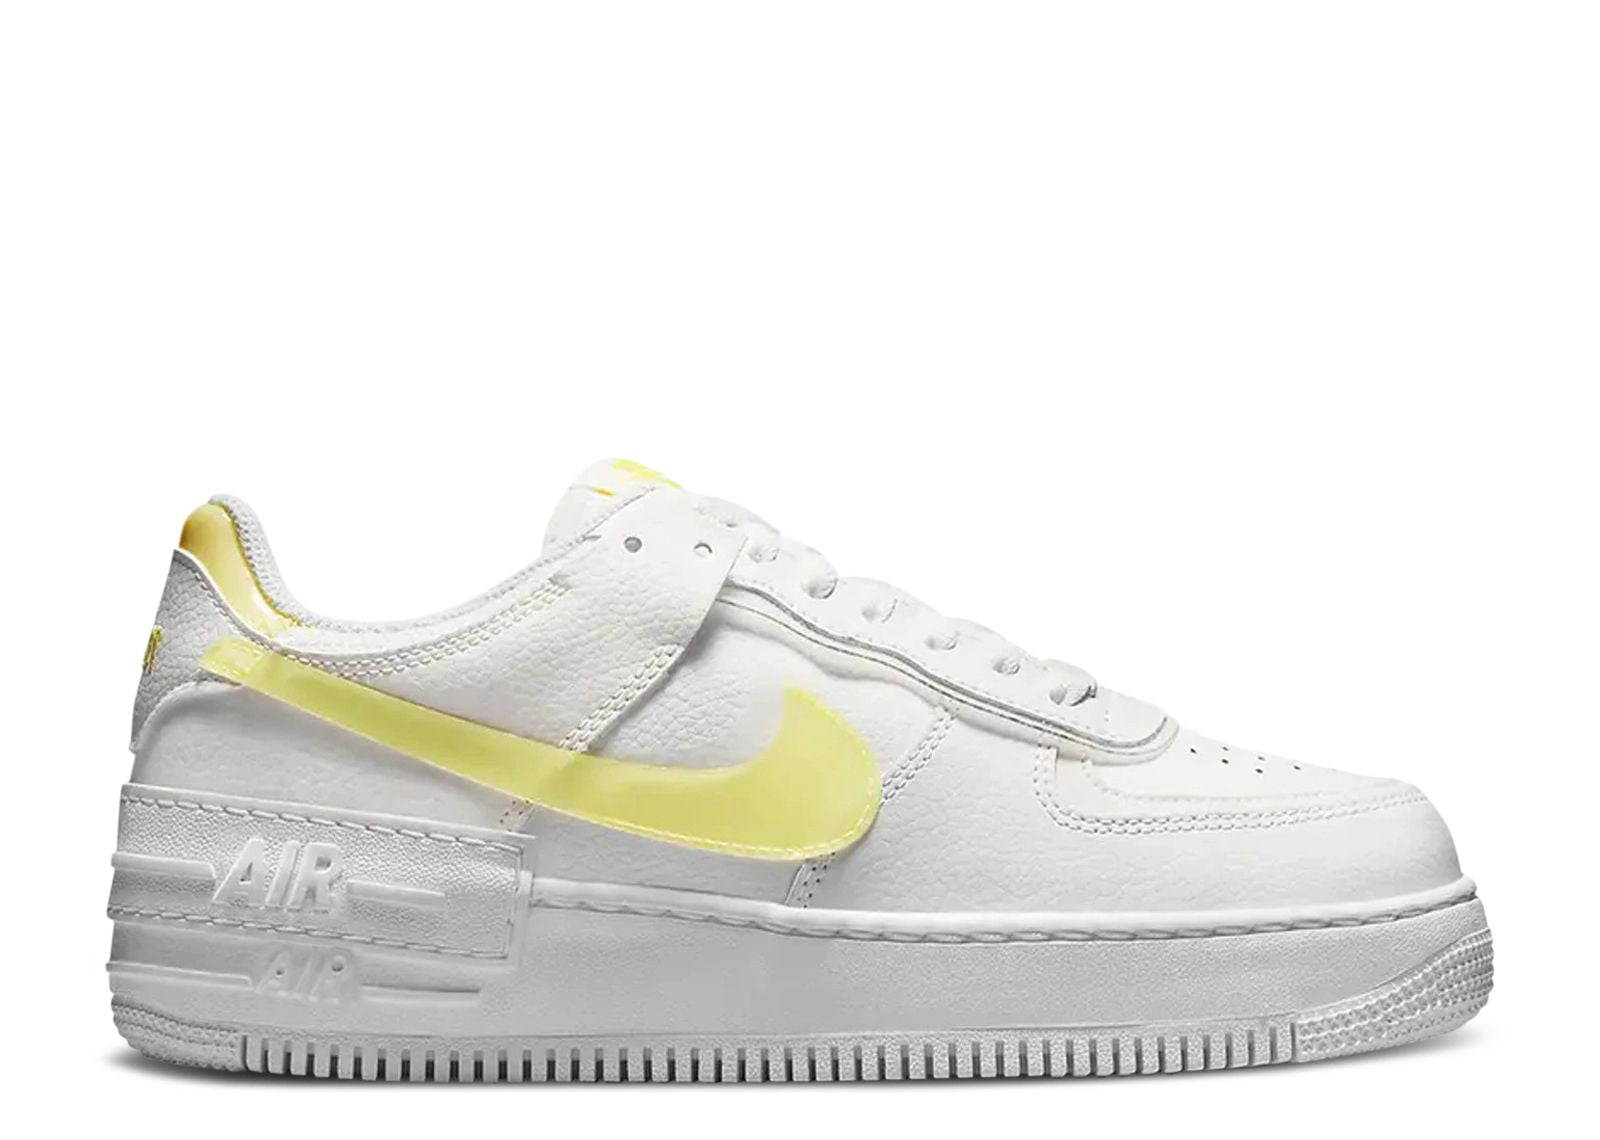 Second Chance - Nike Air bell 1 Shadow White Opti Yellow - 40 | NEW